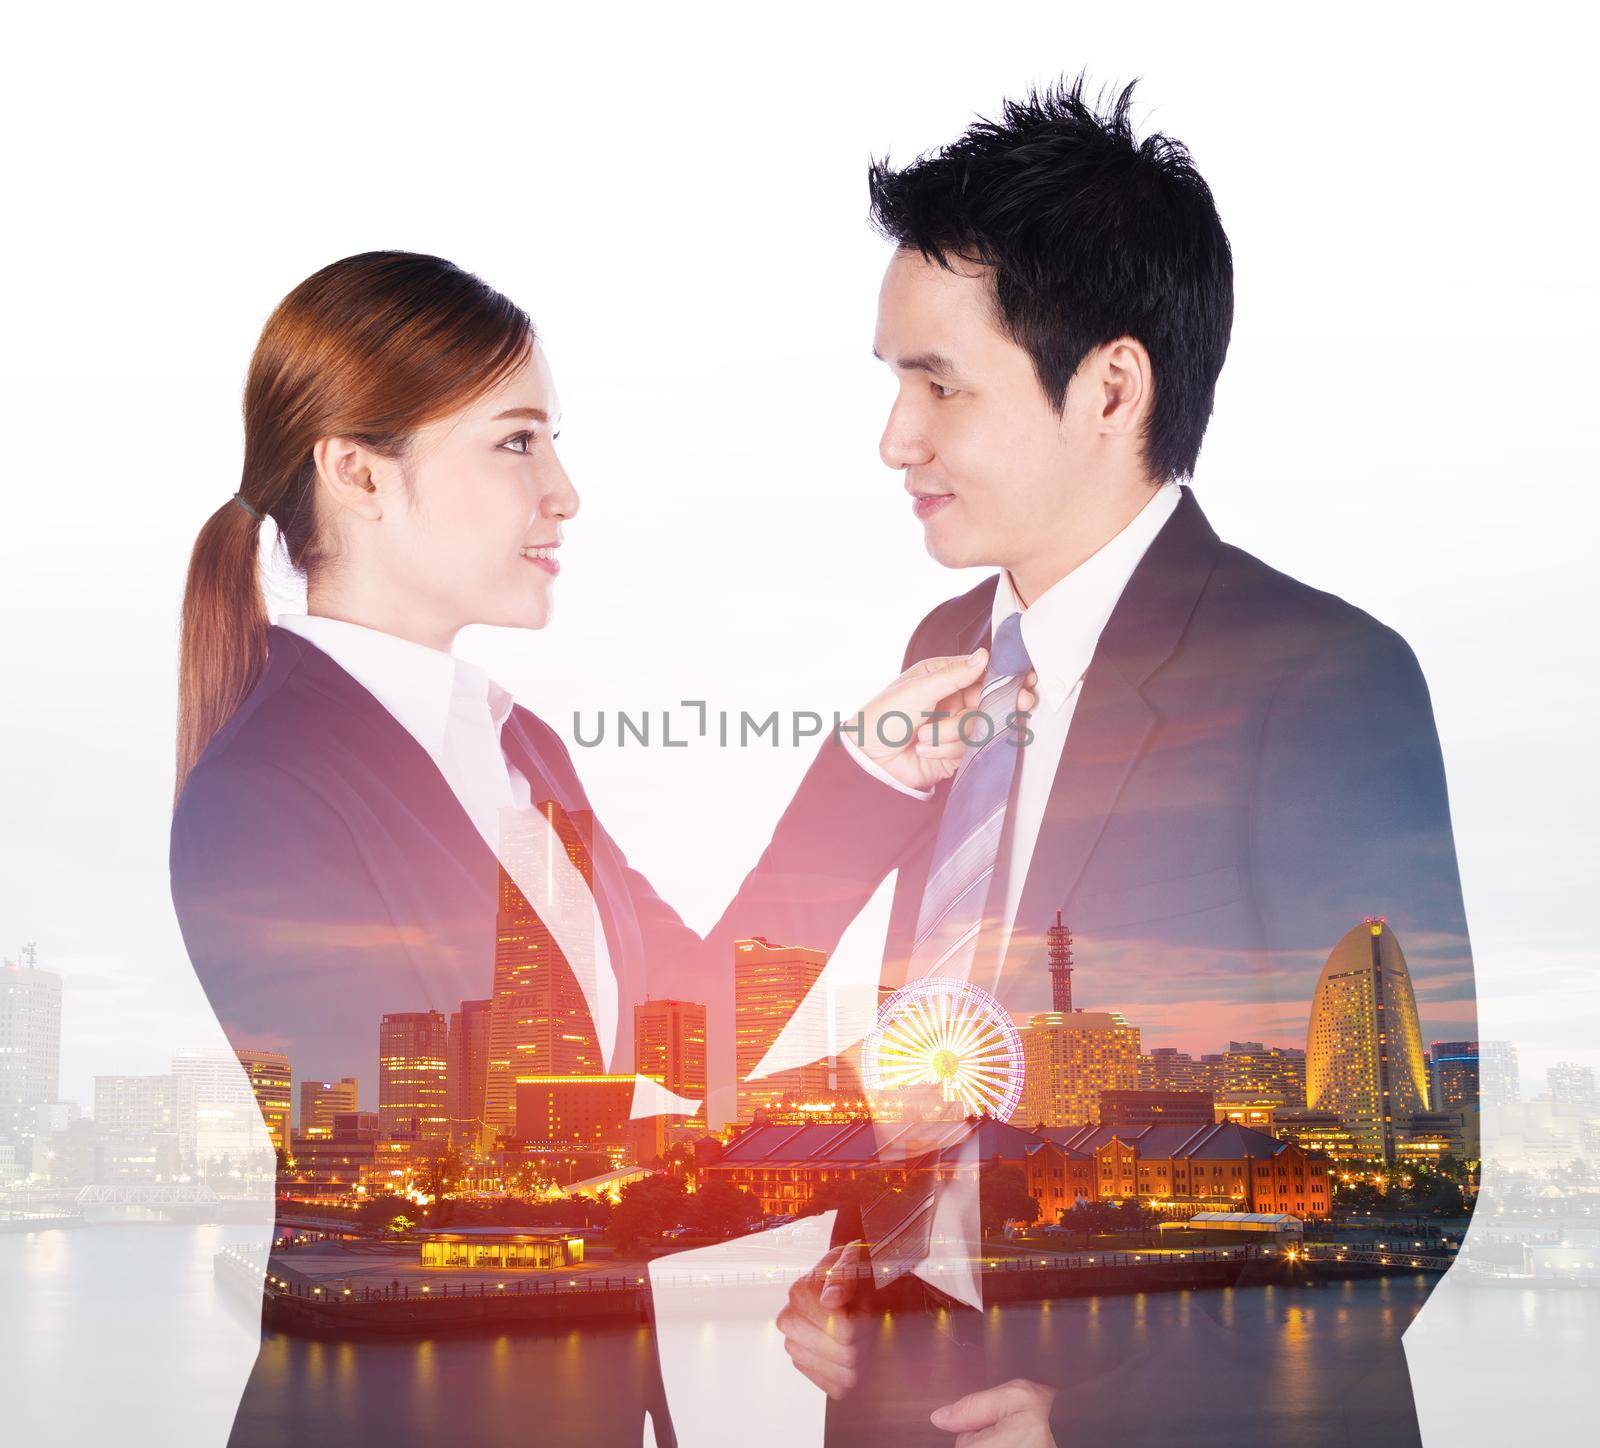 double exposure of business woman's hands adjusting neck tie of man in suit with a city background